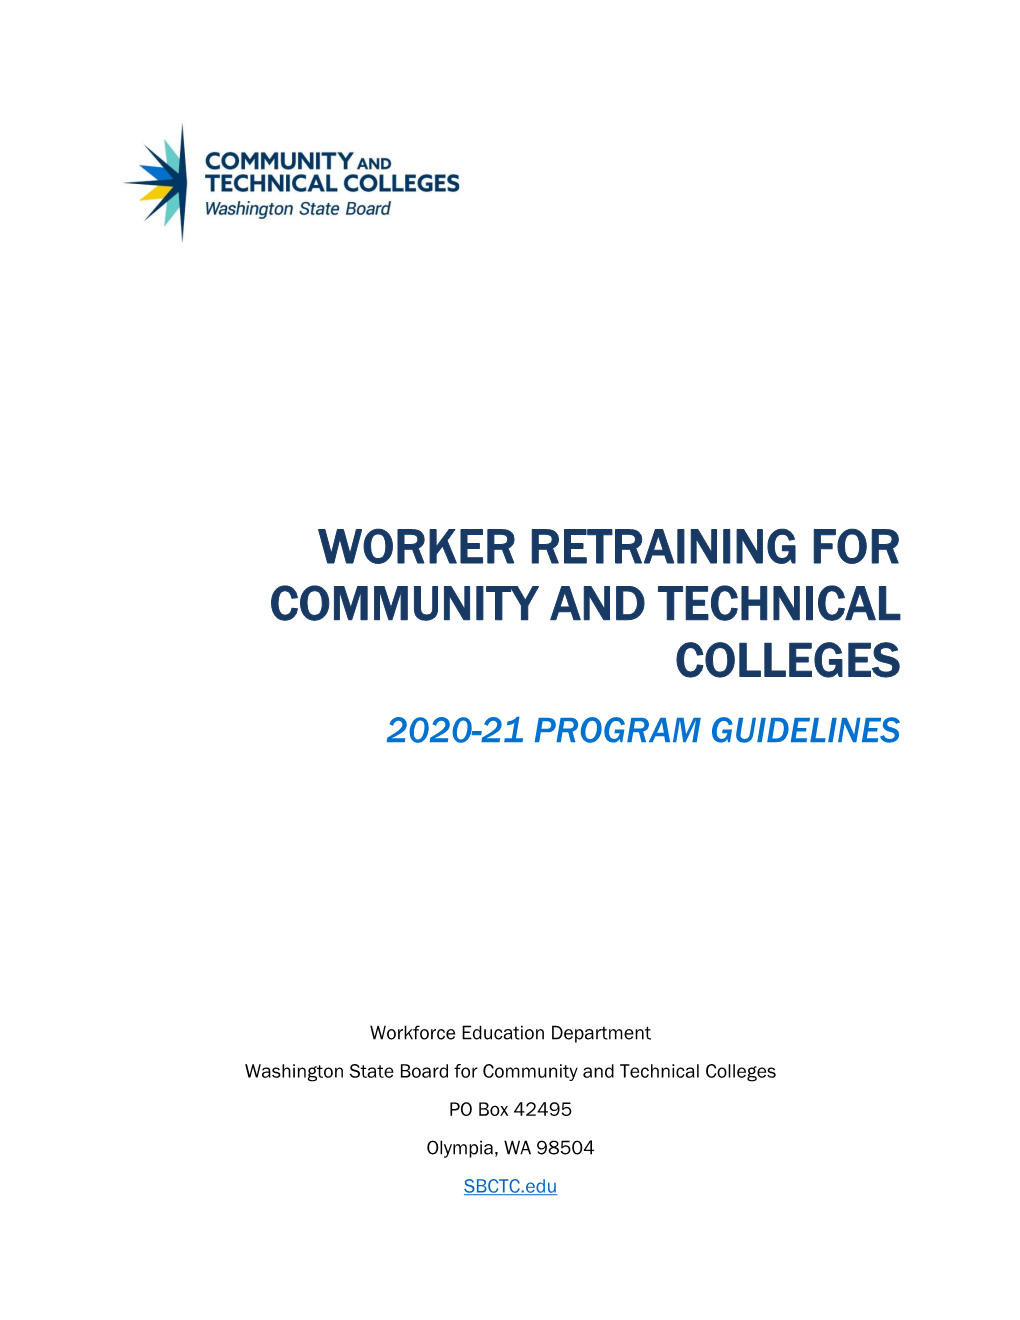 FY21 Worker Retraining Guidelines for Community And